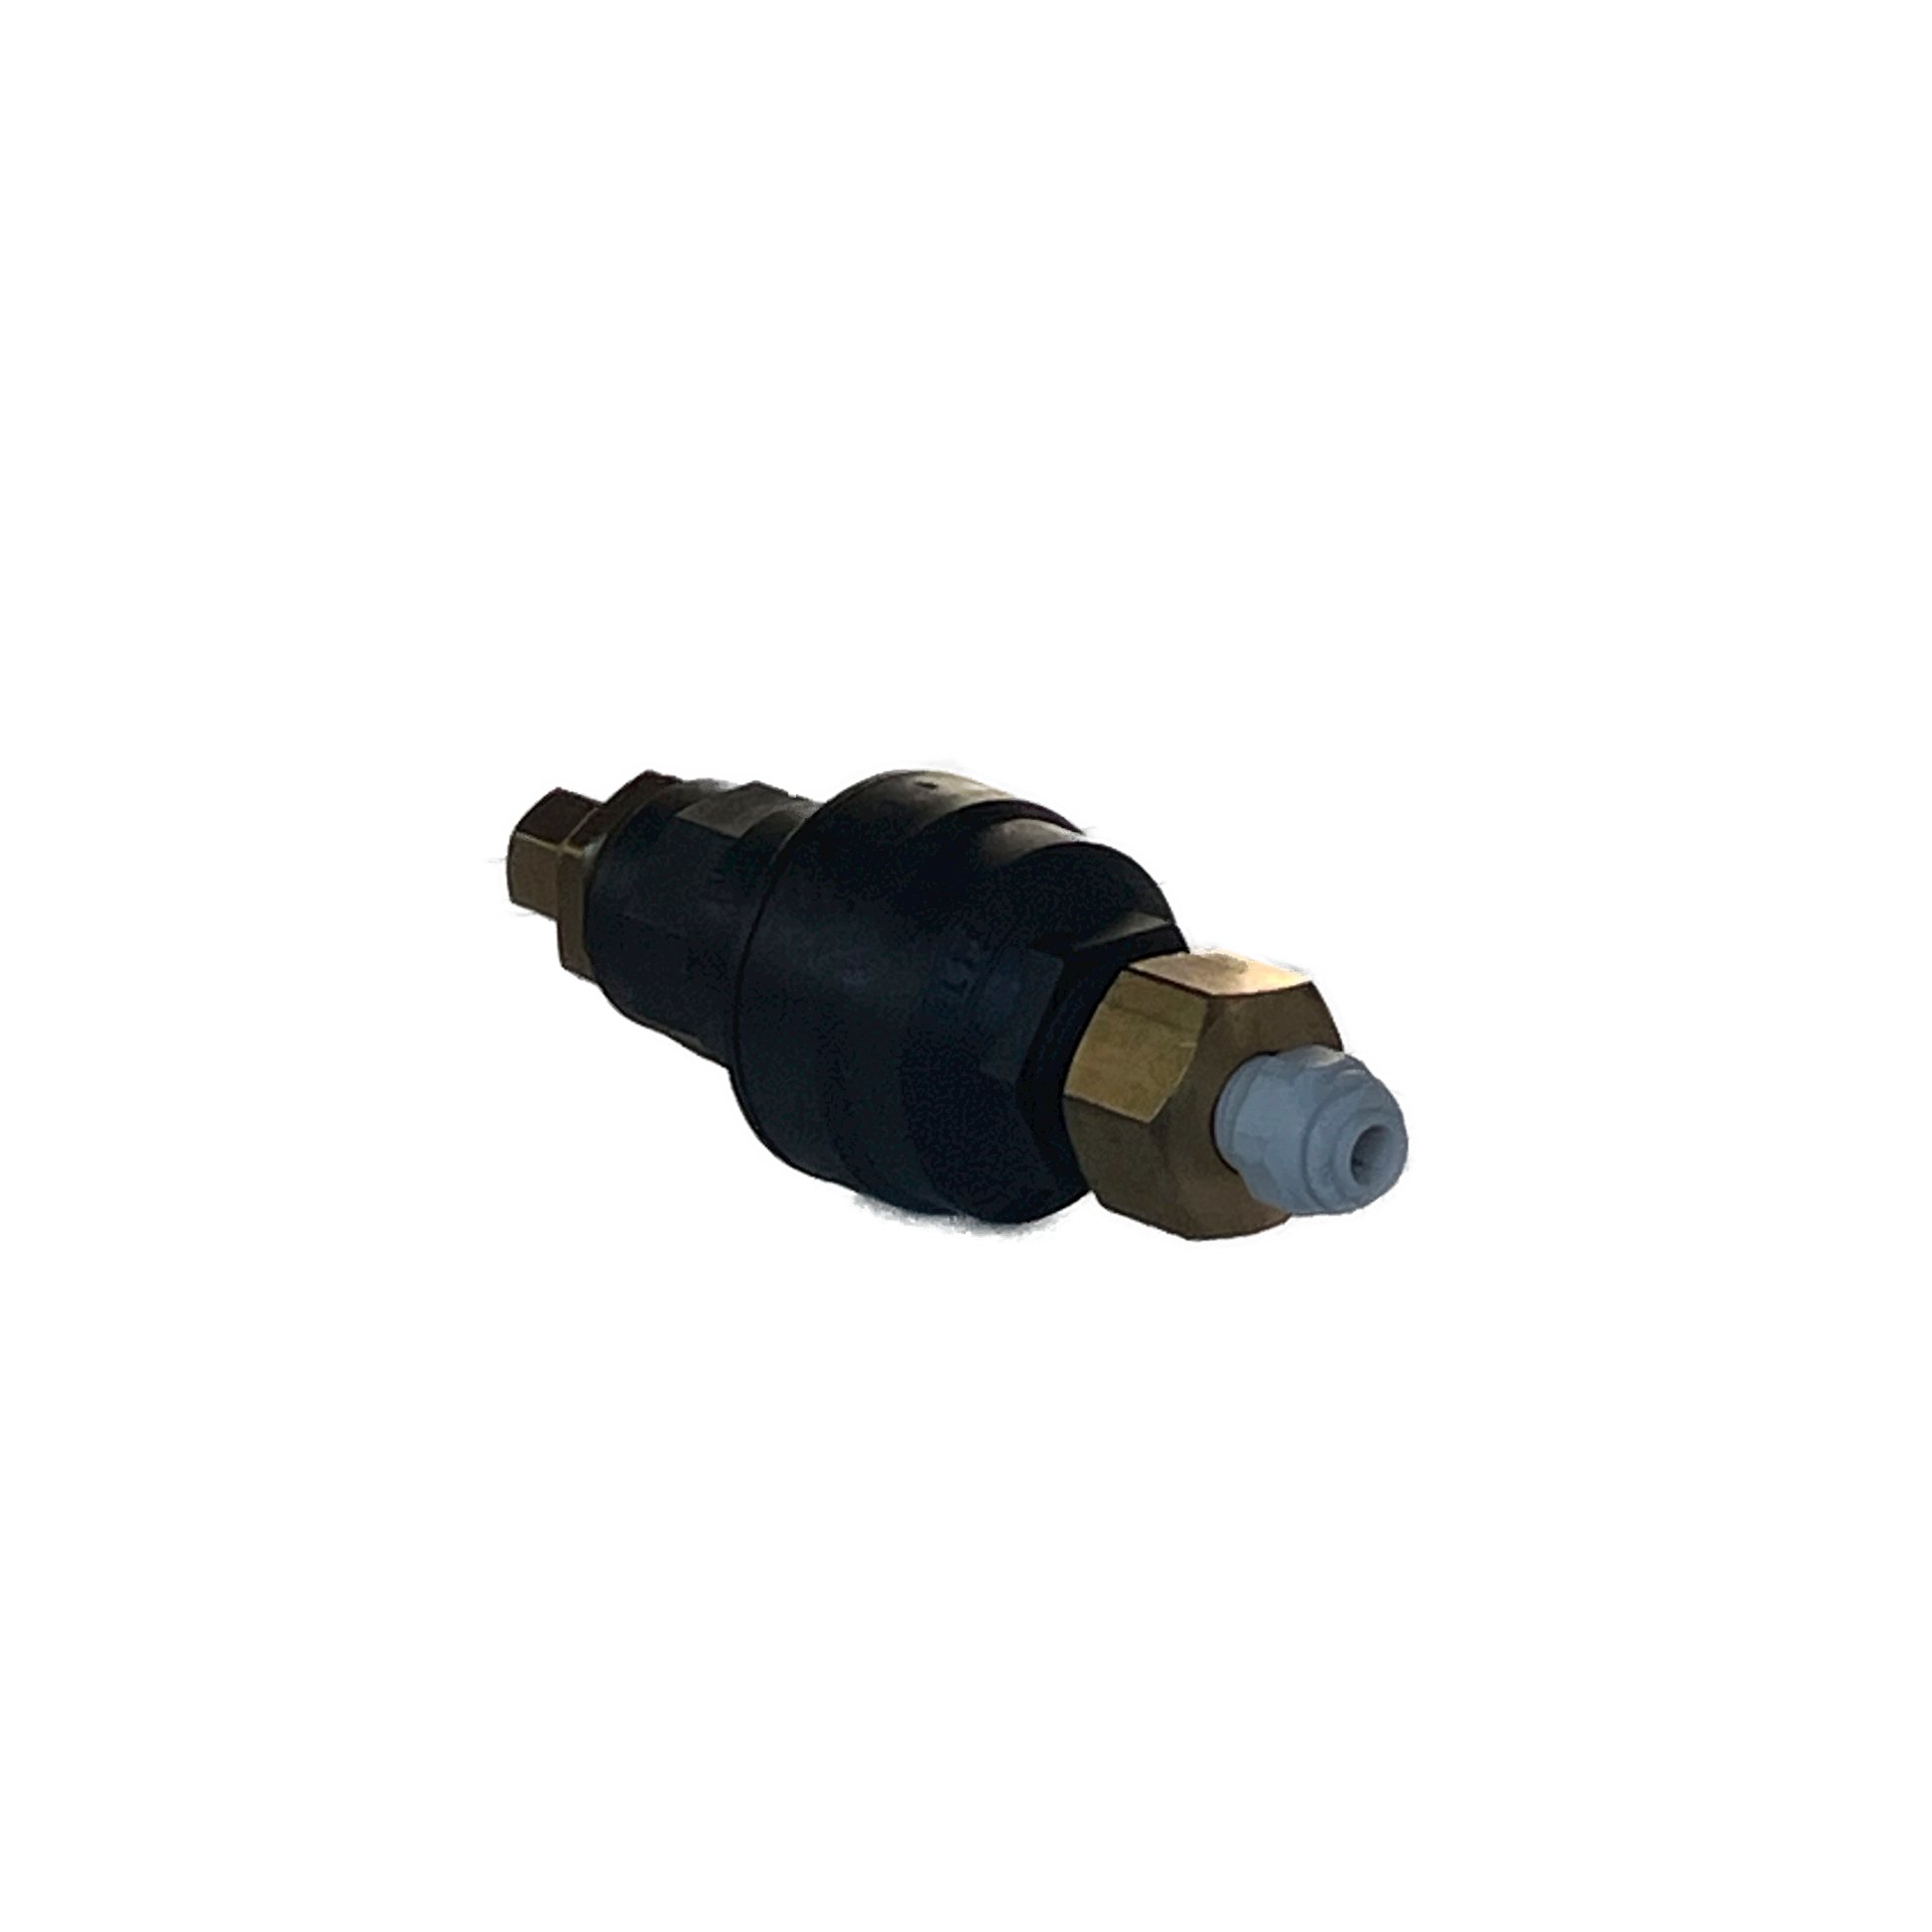 Water Block, 1/4" John Guest Quick Connect, and 1/4" water supply line fitting to protect your home from water damage caused by leaks and floods. The 1/4" water supply line fitting is used to connect the Water Block to your water supply line.